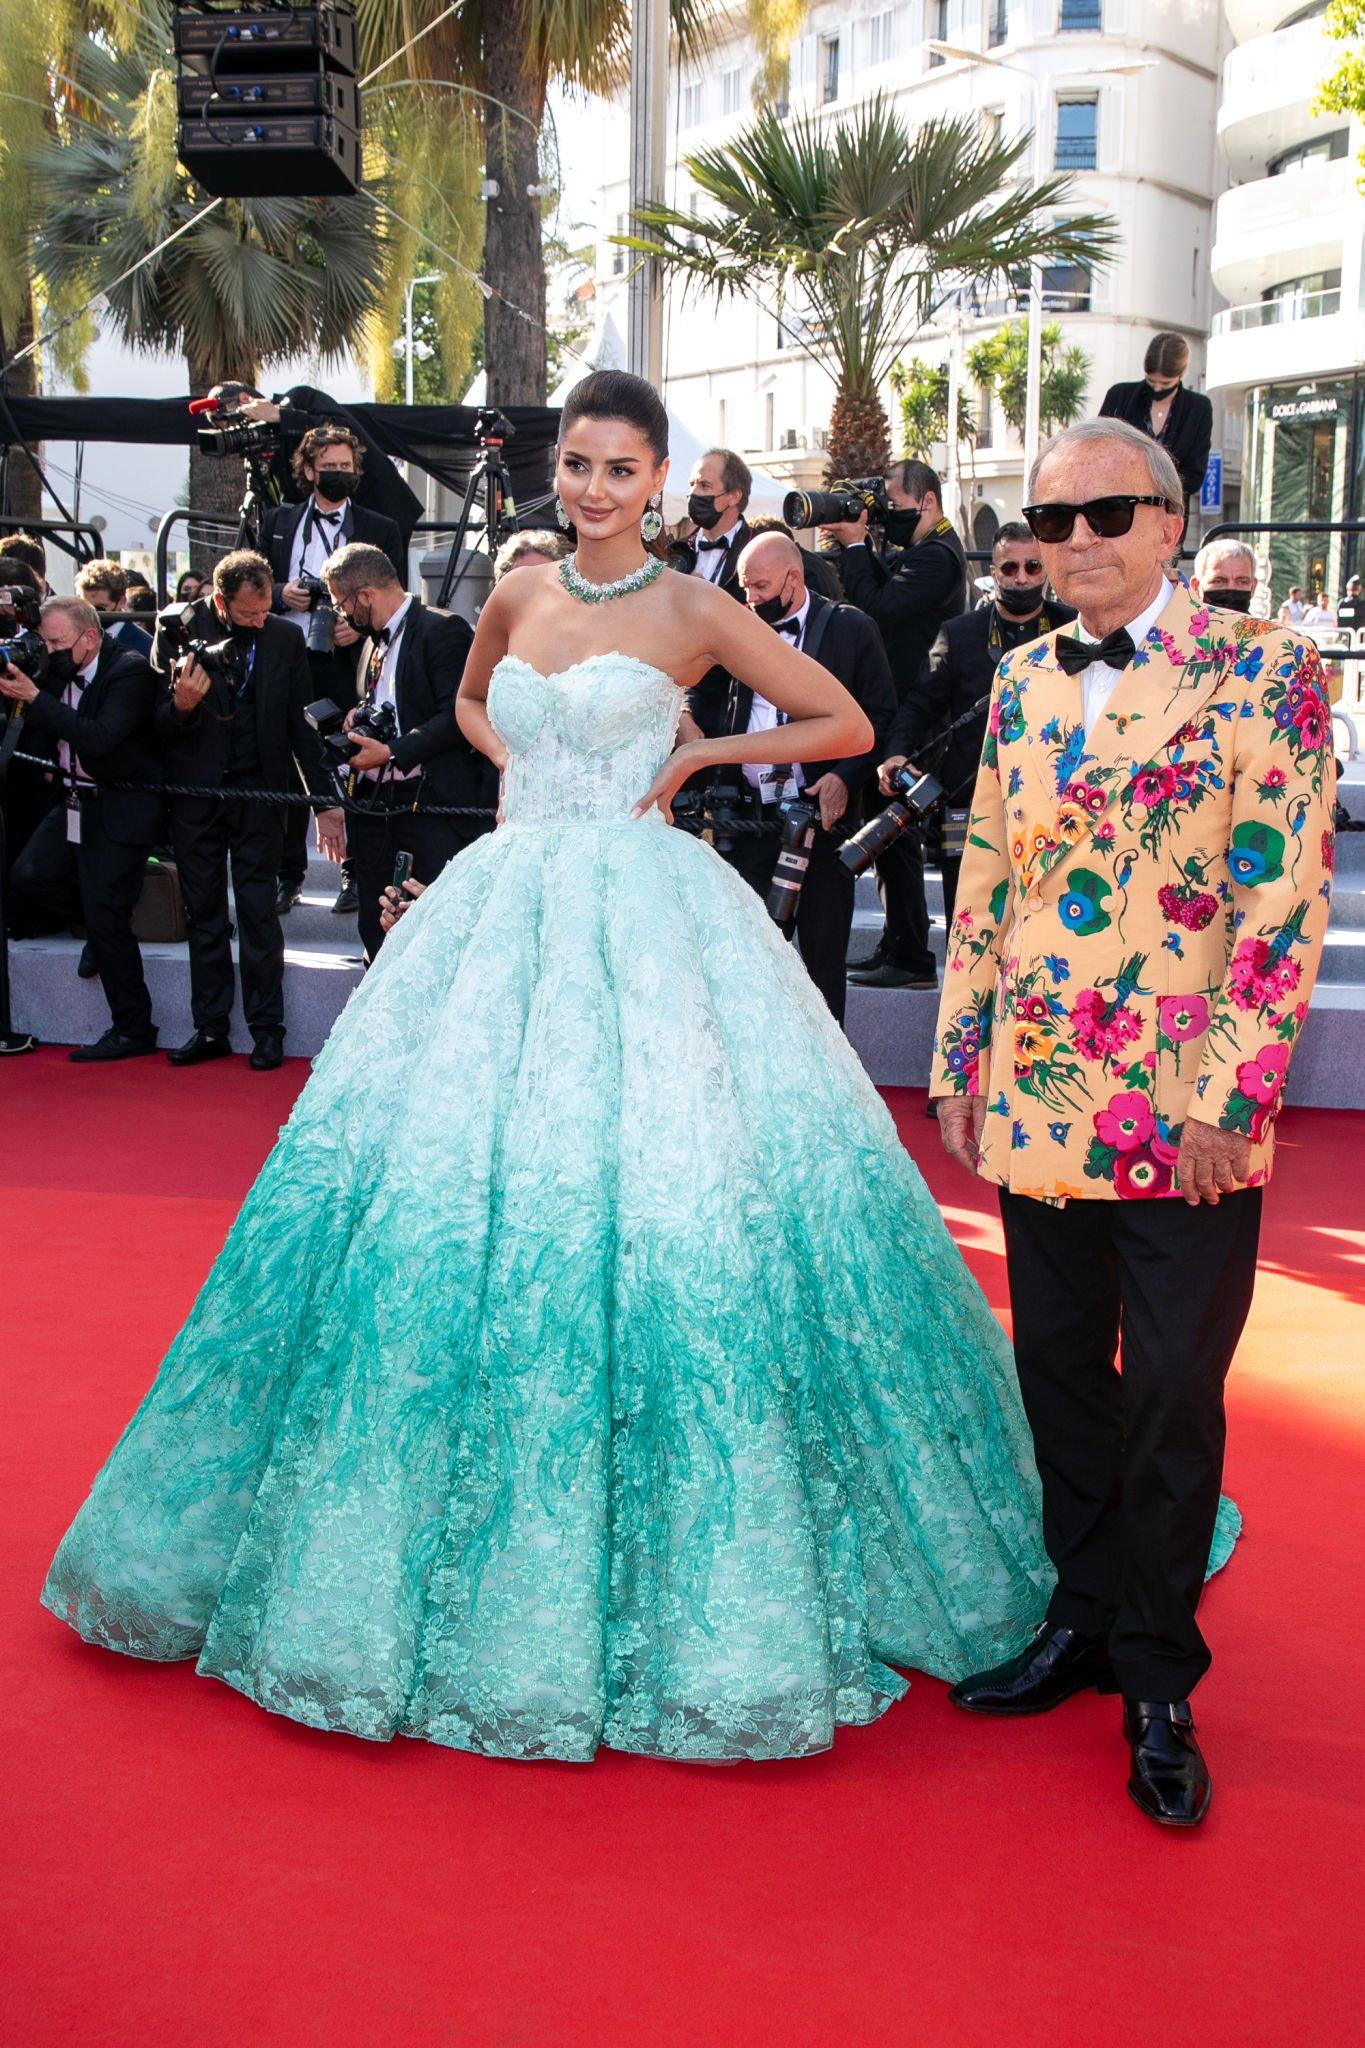 Mahlagha Jaberi at the premiere of "Tre Piani" during the Cannes Film Festival 